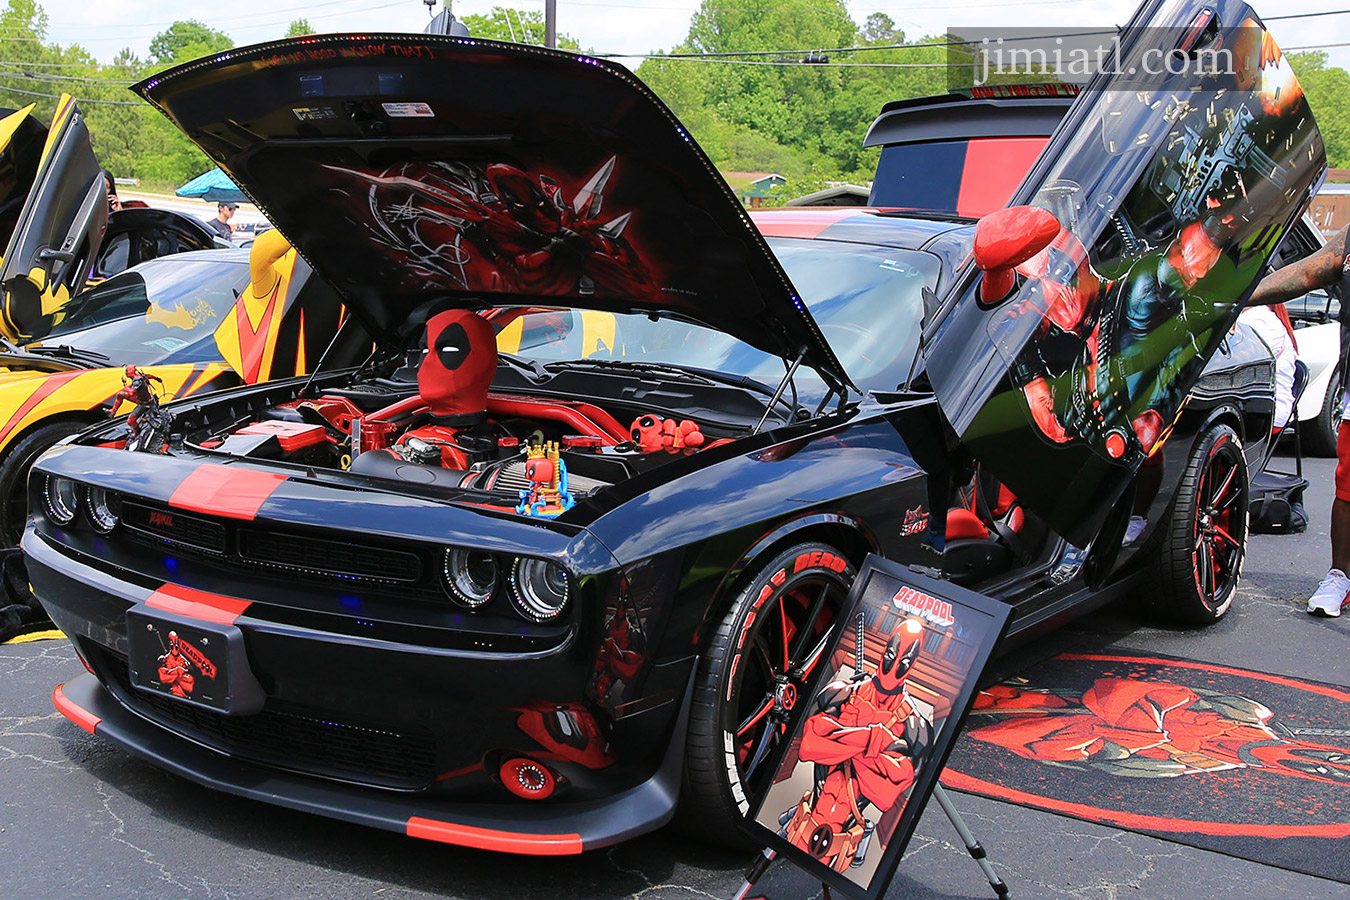 Dodge Charger with Deadpool decorations at car show downtown Lawrenceville